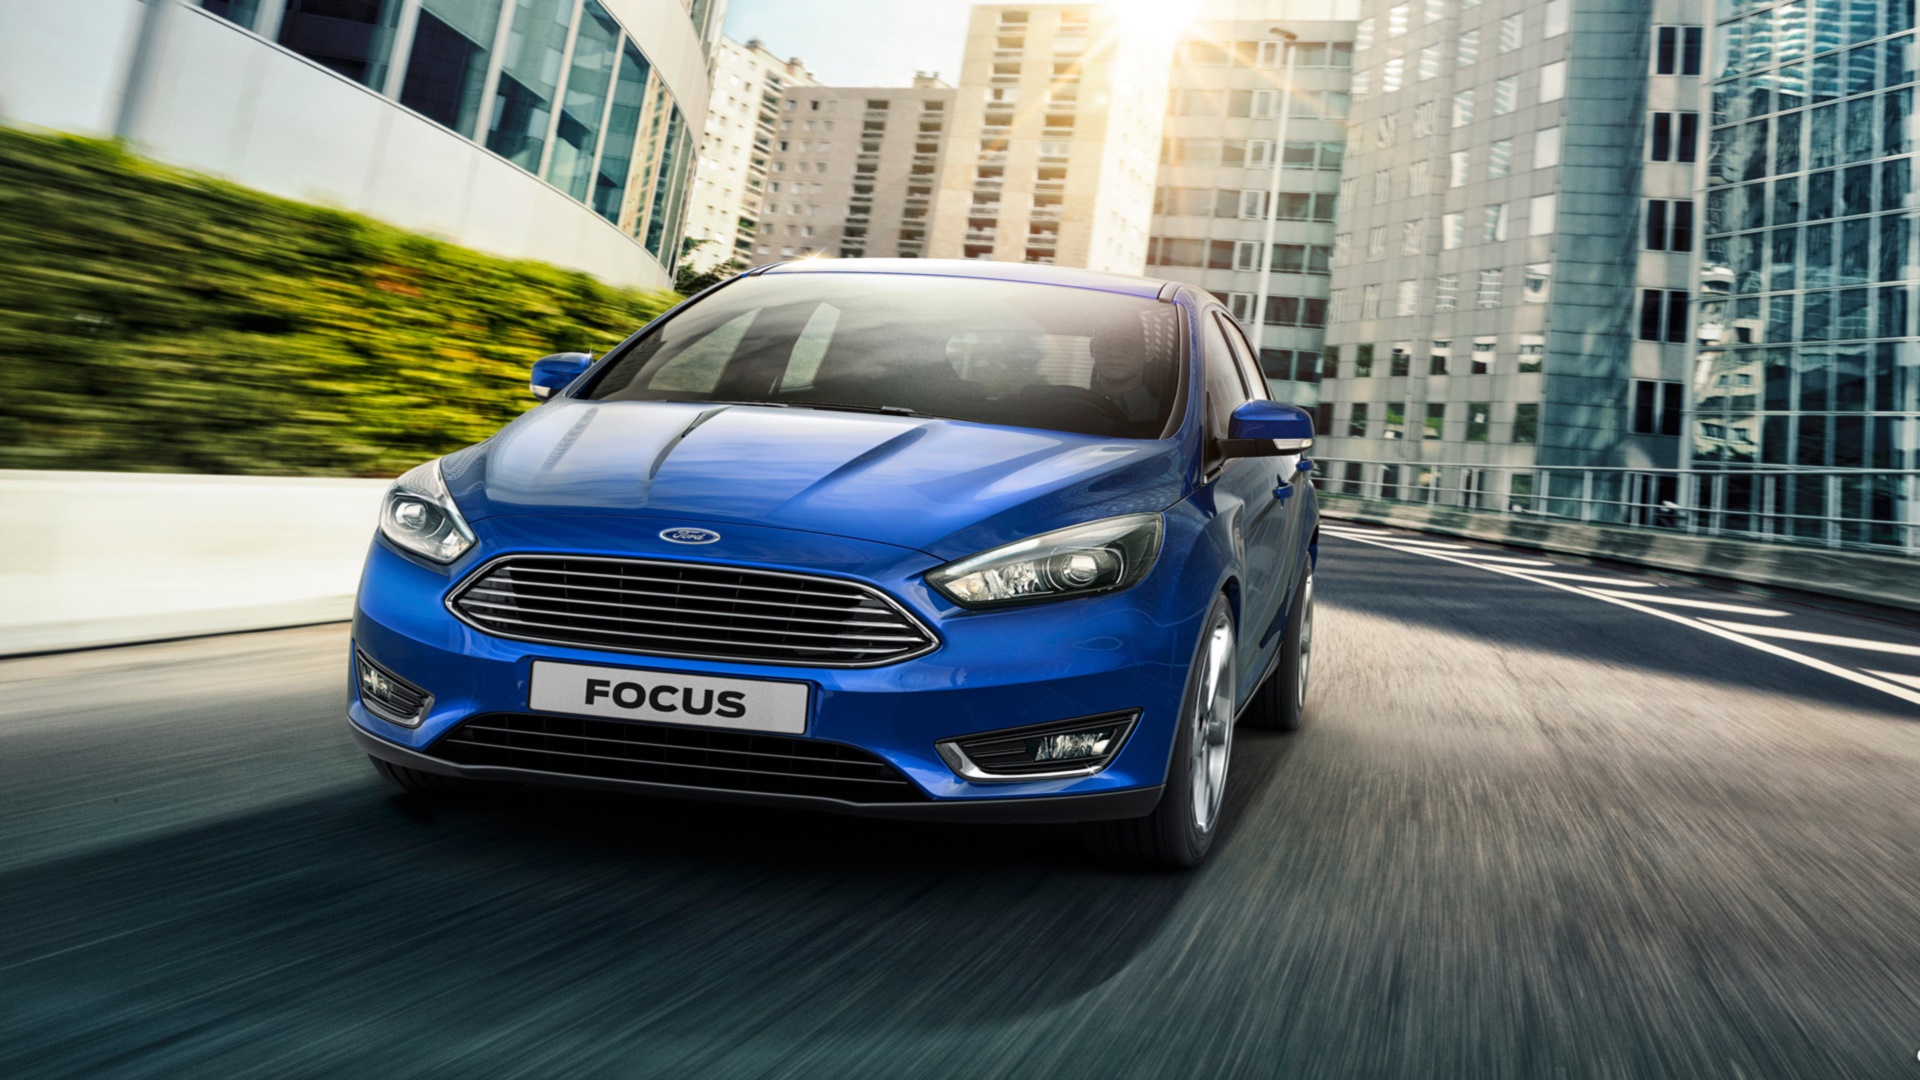 Vehicles 2015 Ford Focus HD Wallpaper | Background Image